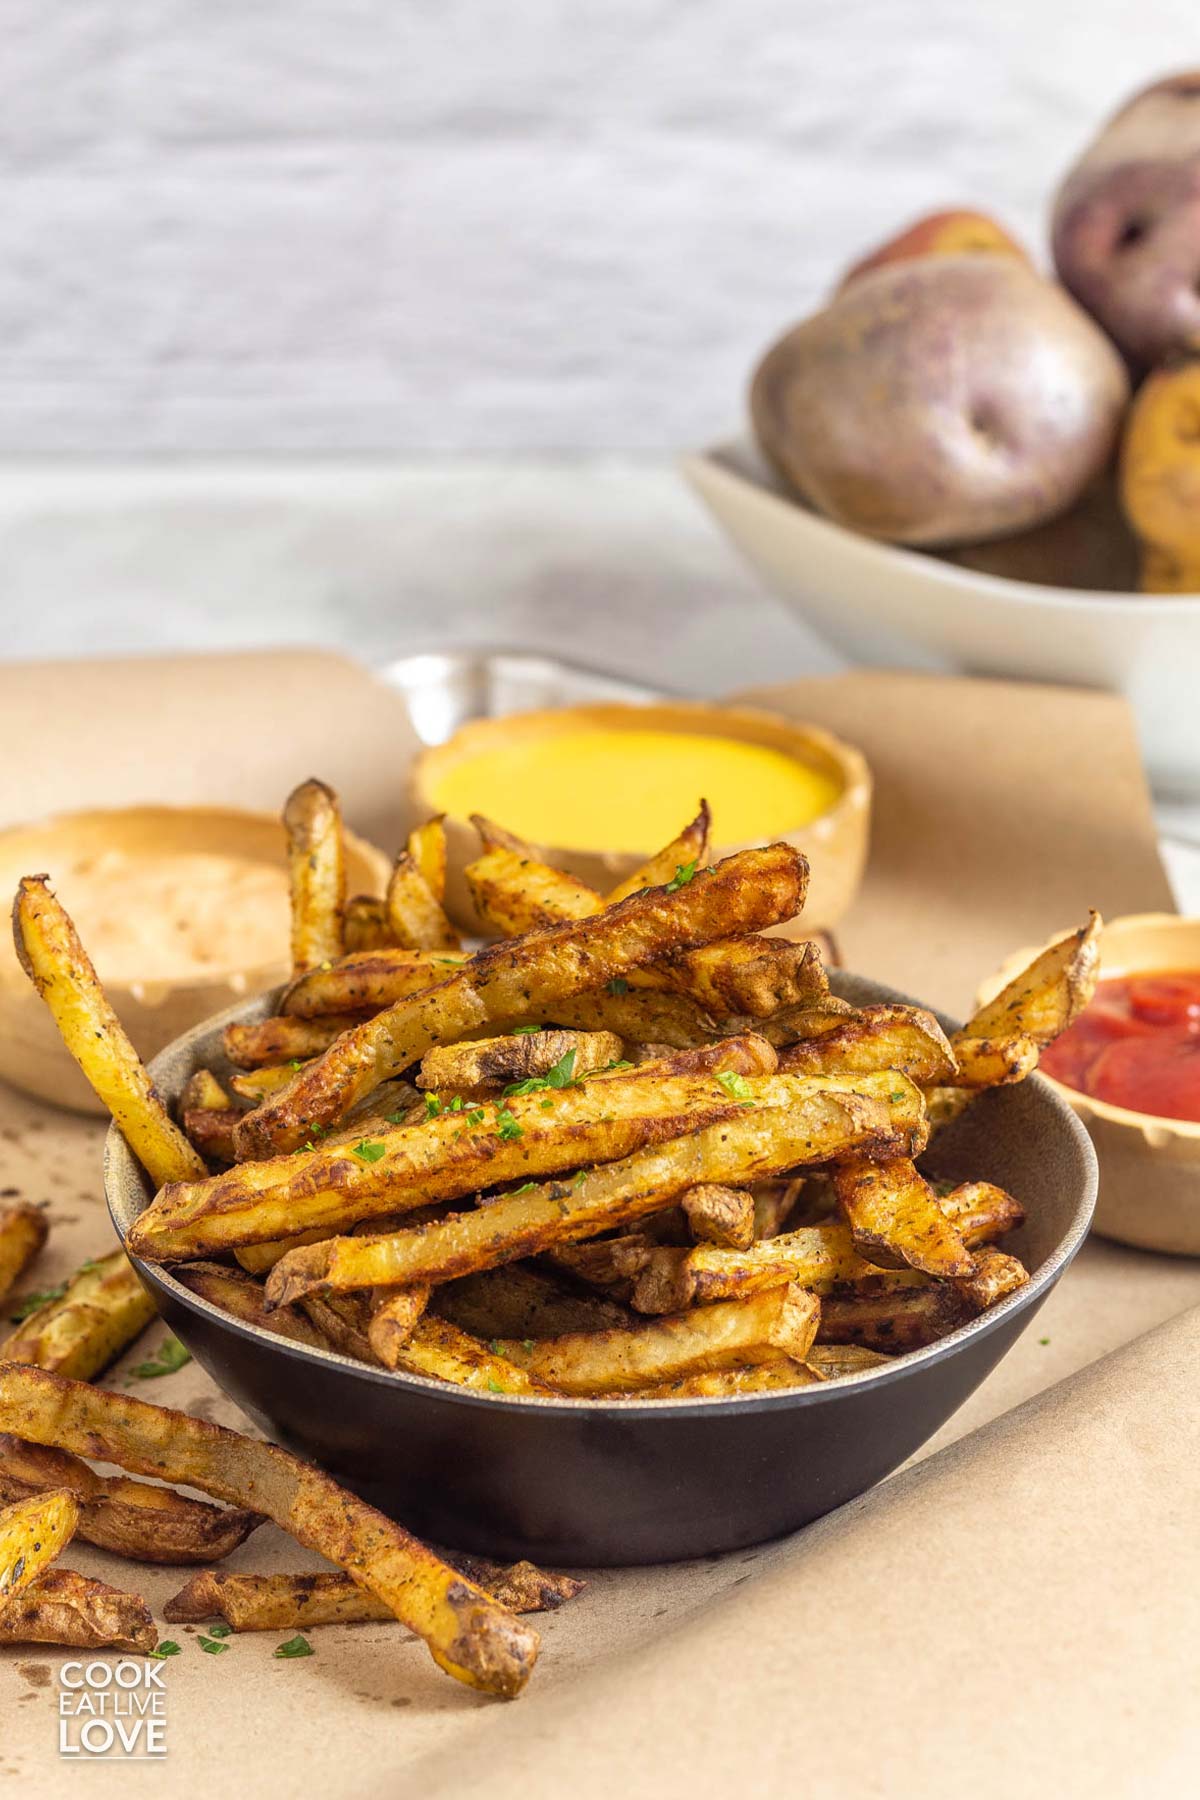 Bowl of baked french fries on the table with dipping sauces.